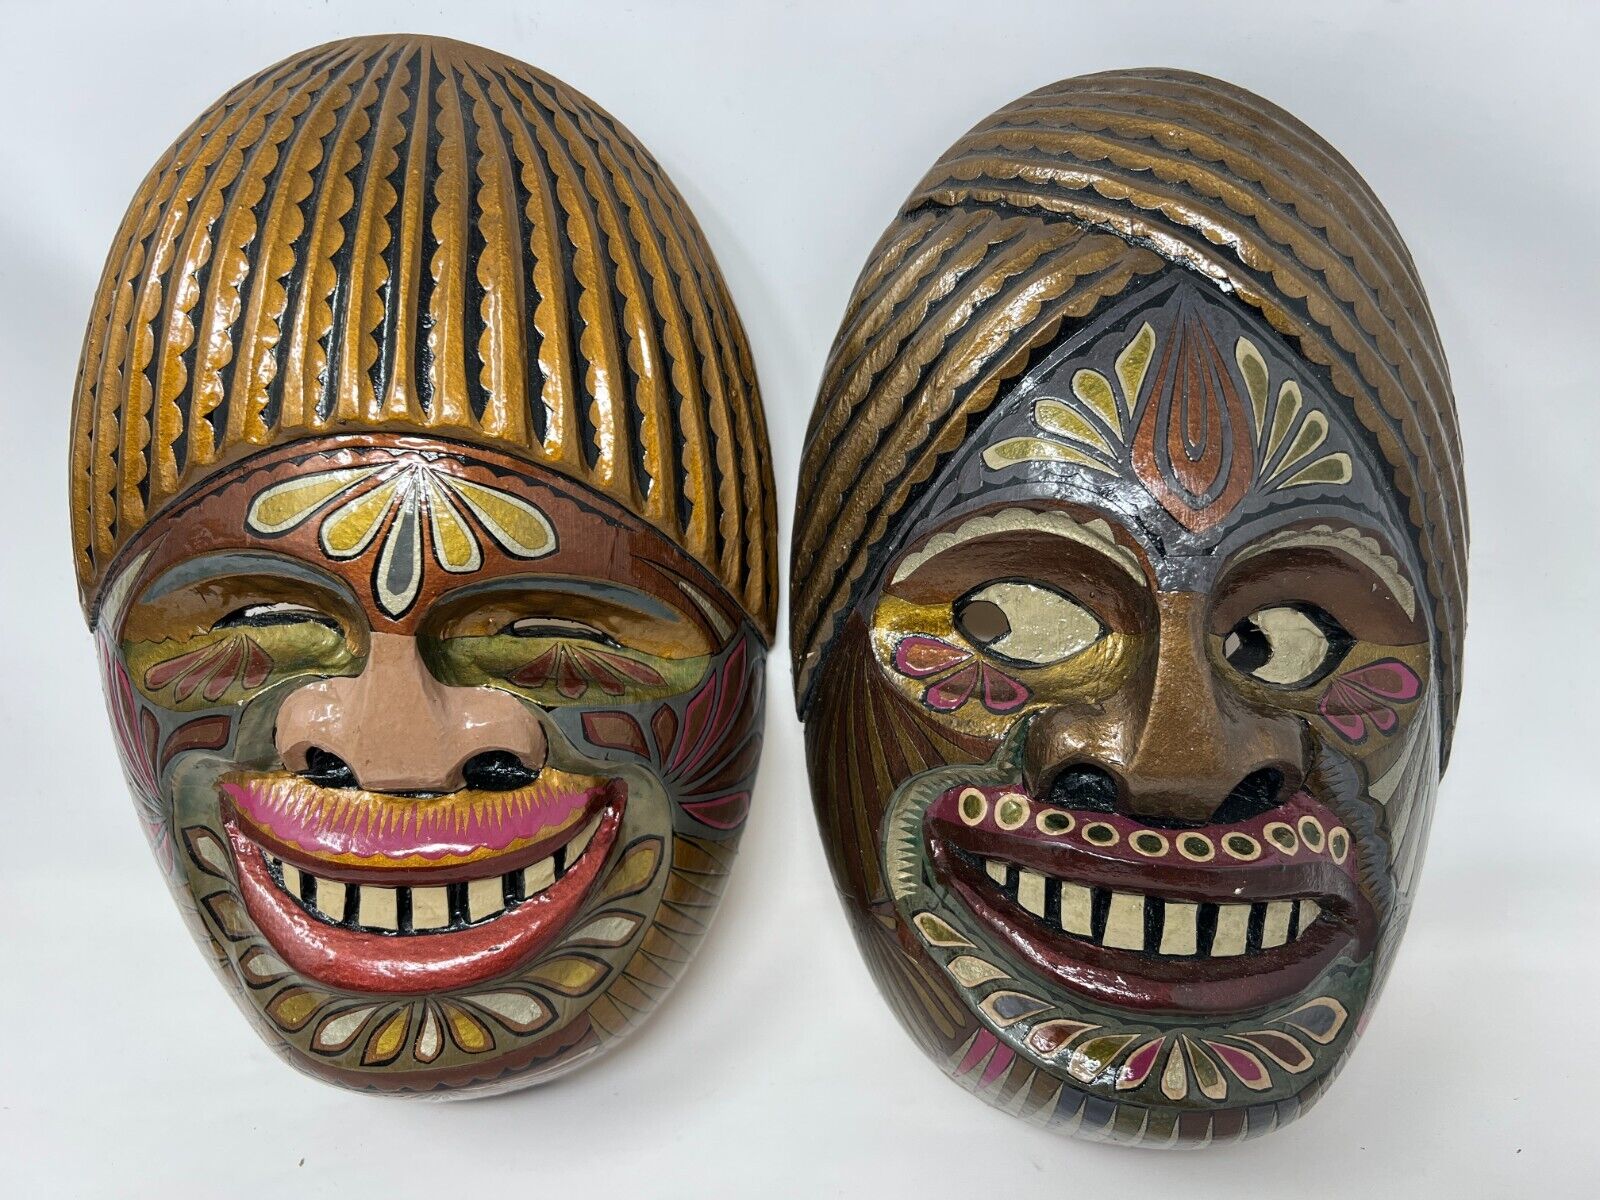 2x African Wooden Tribal Face Masks - Hand Carved - Wall Hanging 10”x6"